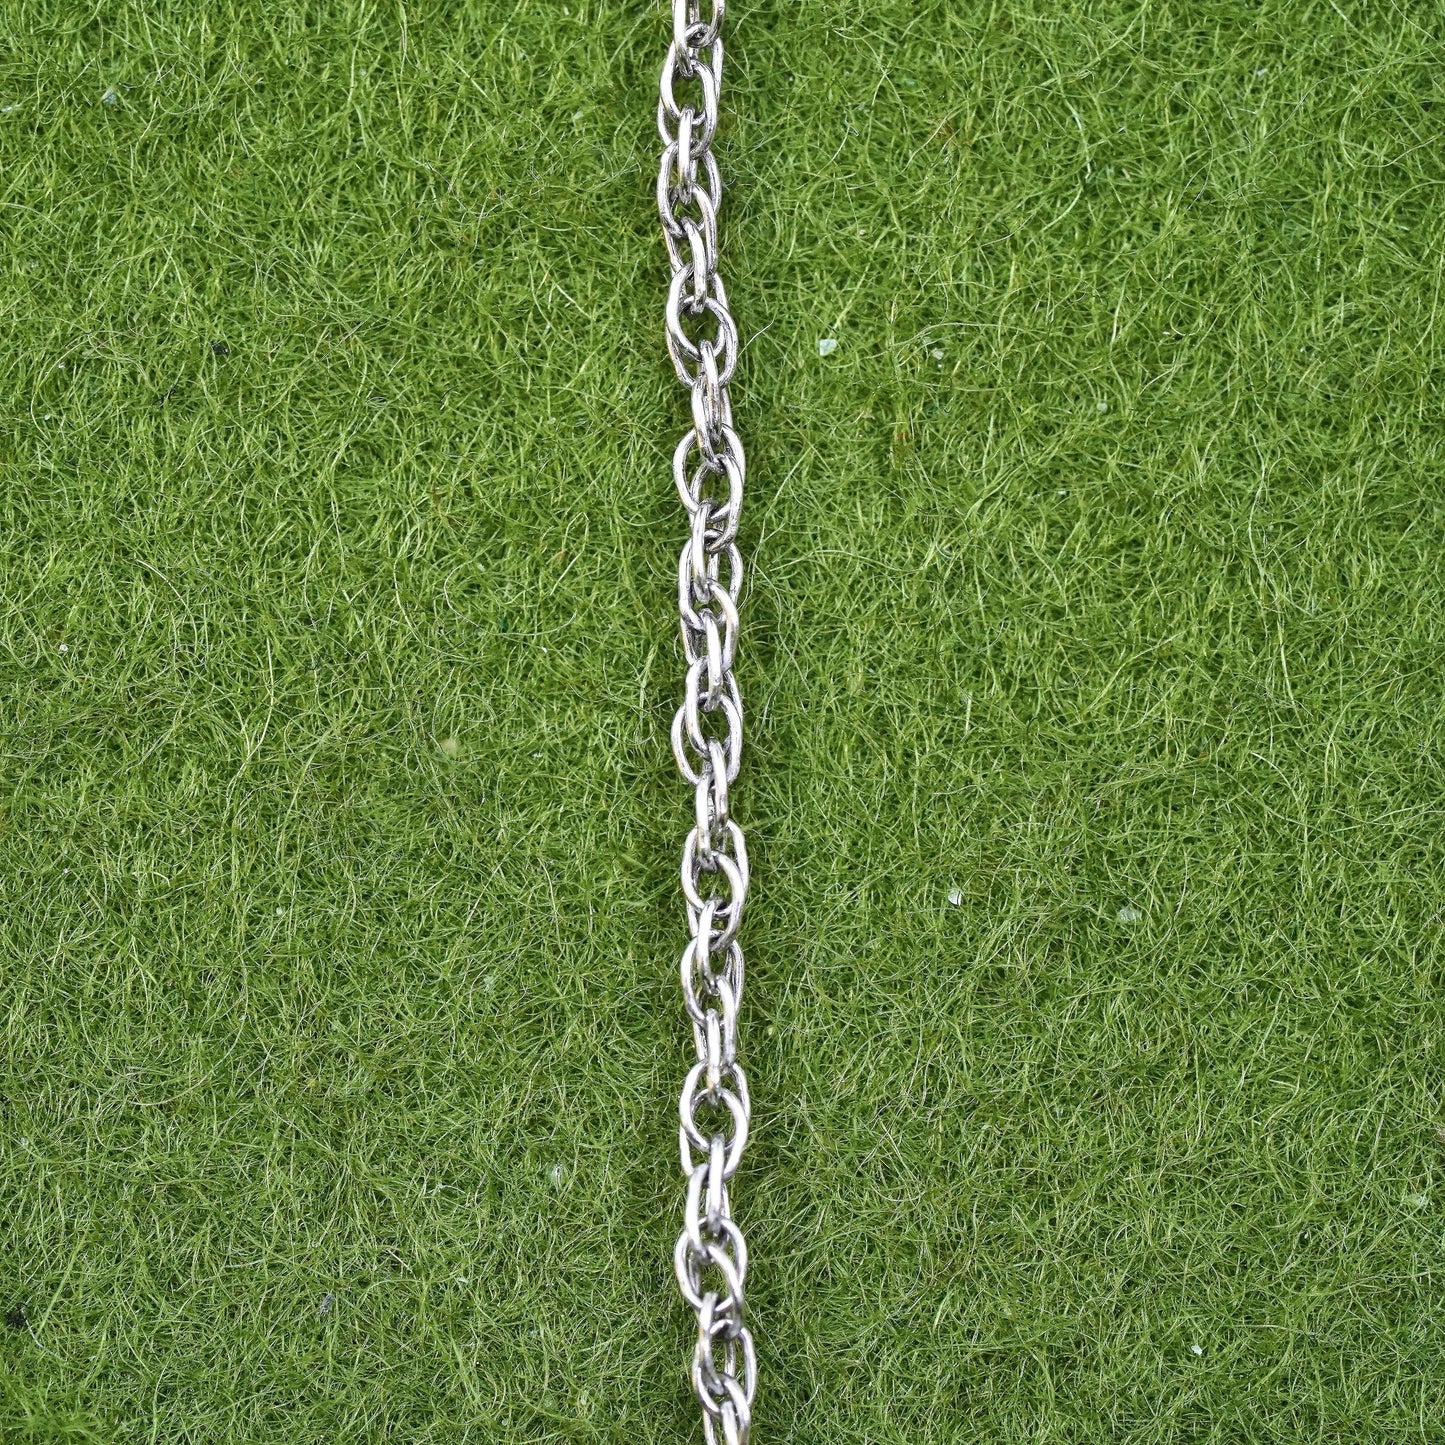 16”, 1mm, vintage Sterling silver necklace, 925 Singapore rope chain